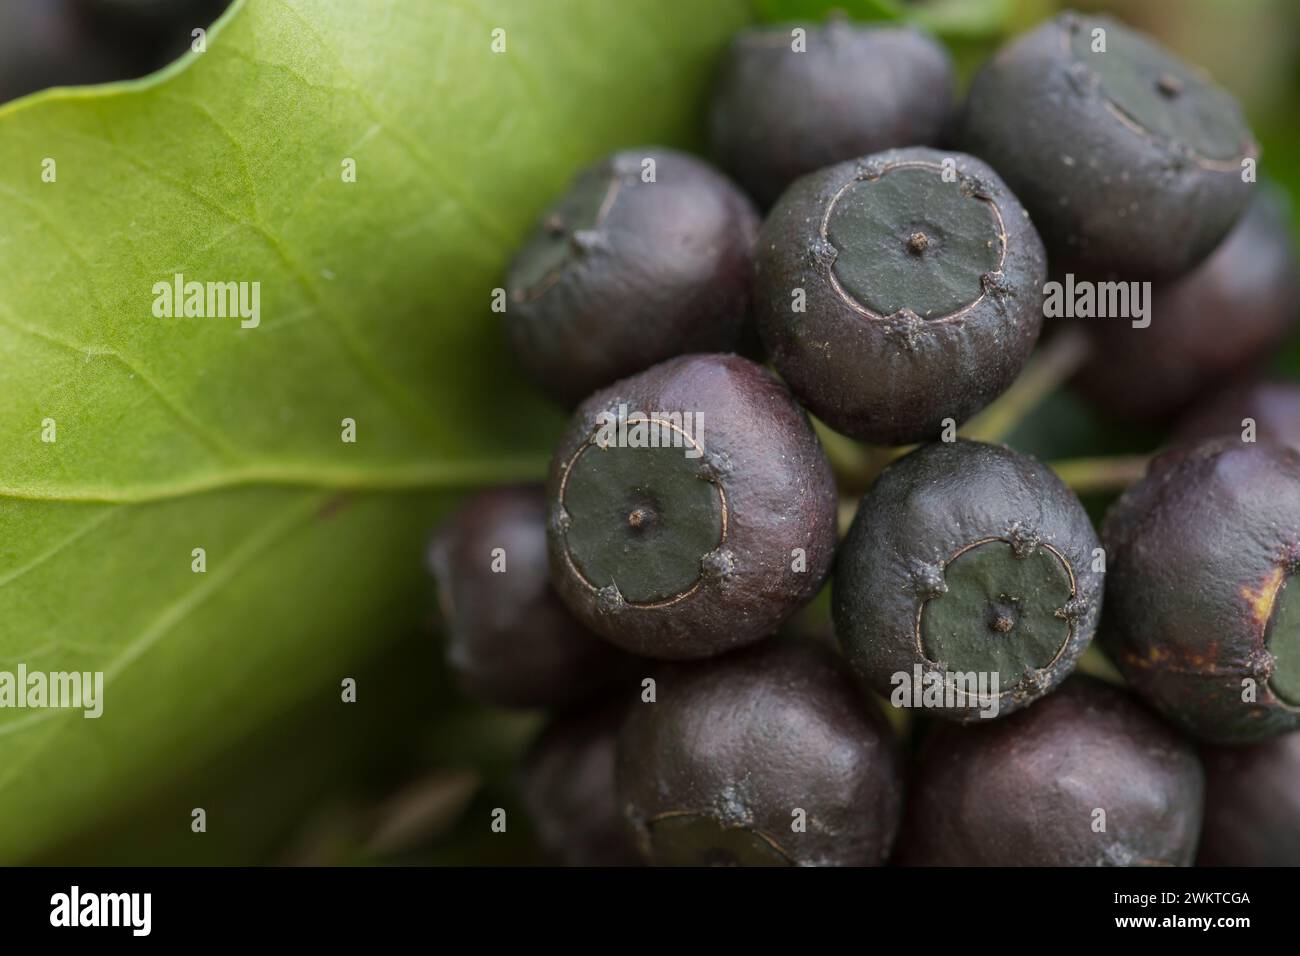 Ivy berries Hedera helix, close up of a head of black berries next to a leaf, March Stock Photo